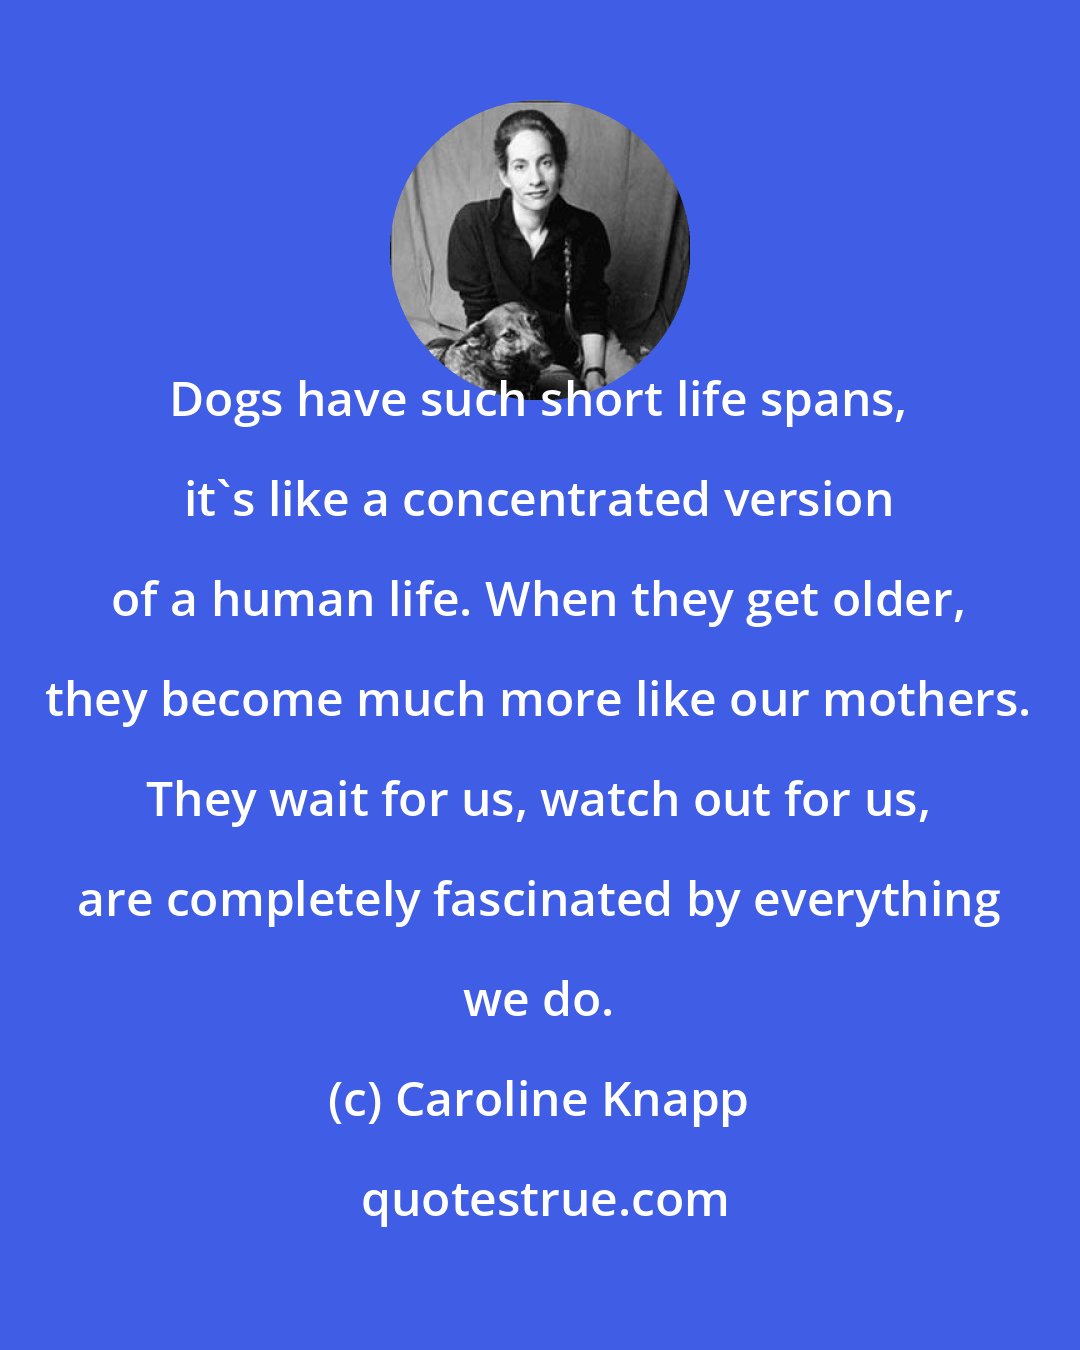 Caroline Knapp: Dogs have such short life spans, it's like a concentrated version of a human life. When they get older, they become much more like our mothers. They wait for us, watch out for us, are completely fascinated by everything we do.